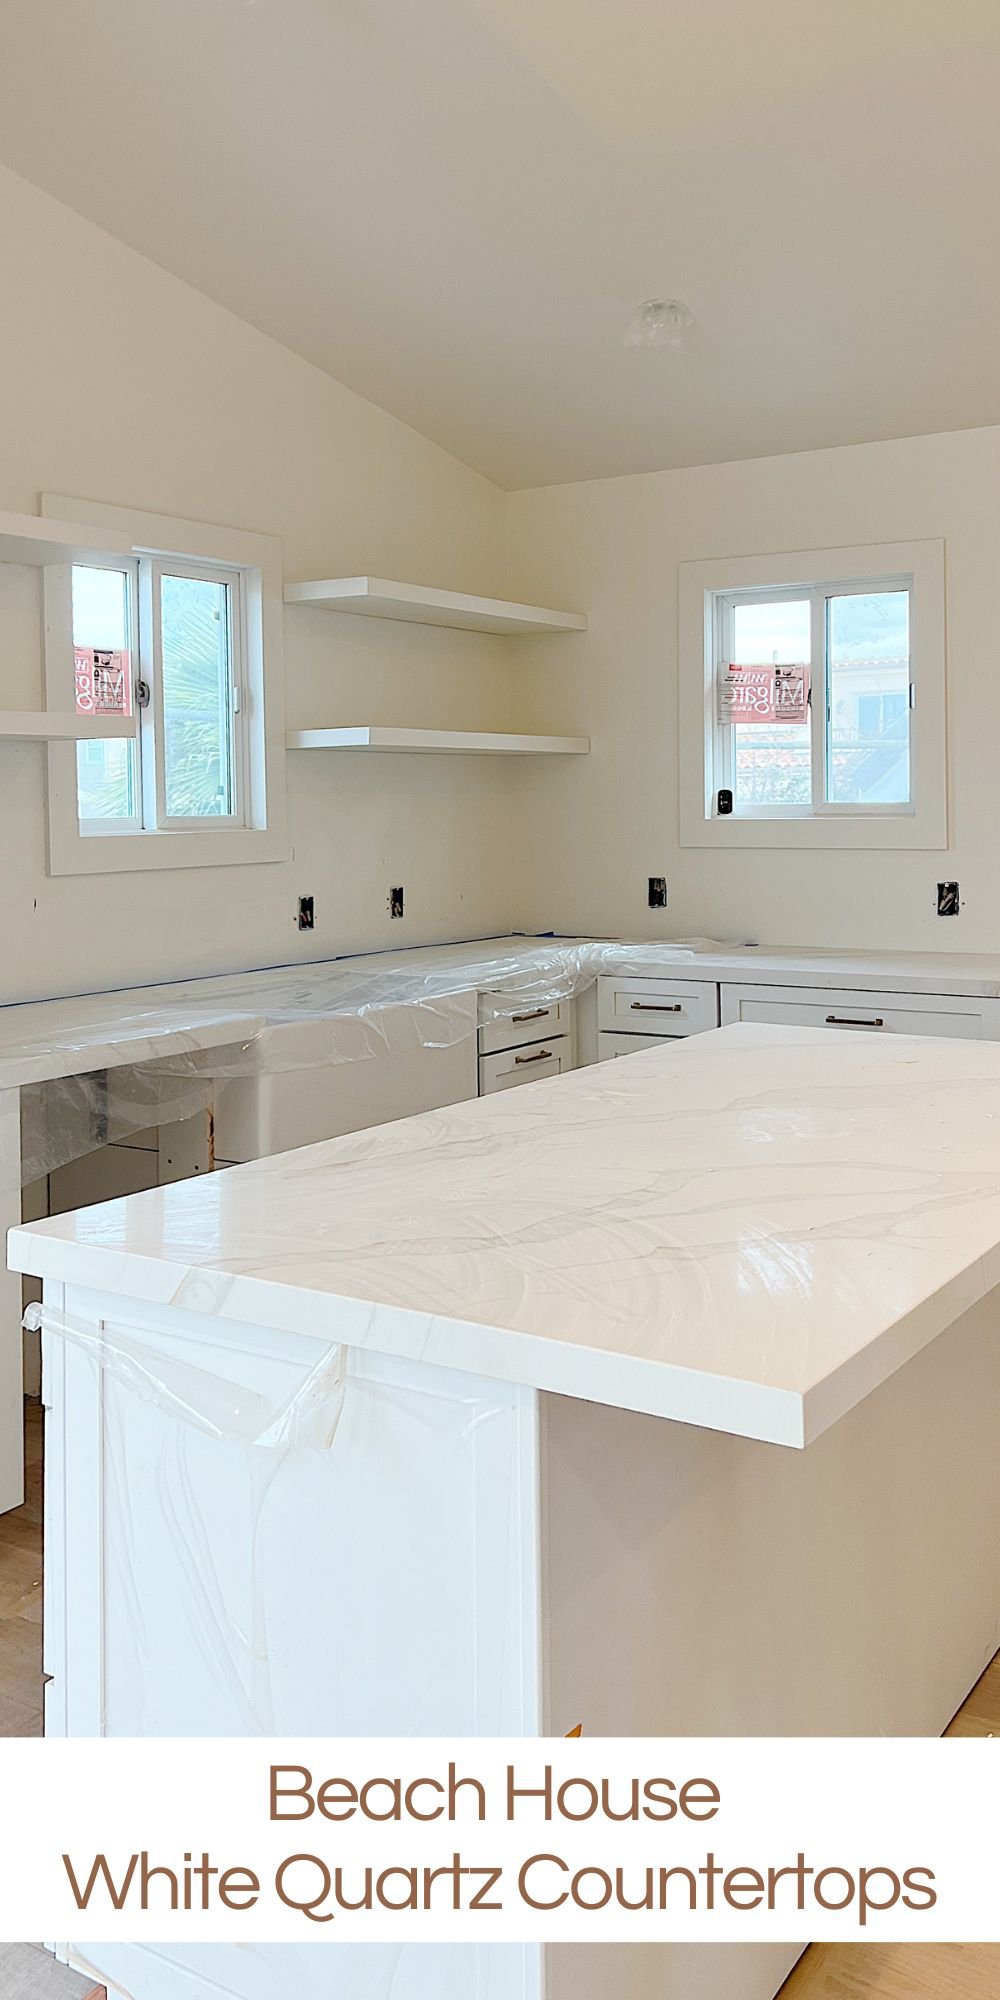 The white quartz countertops are installed and I can't even begin to tell you how much I love them. The beach house kitchen should be done soon!